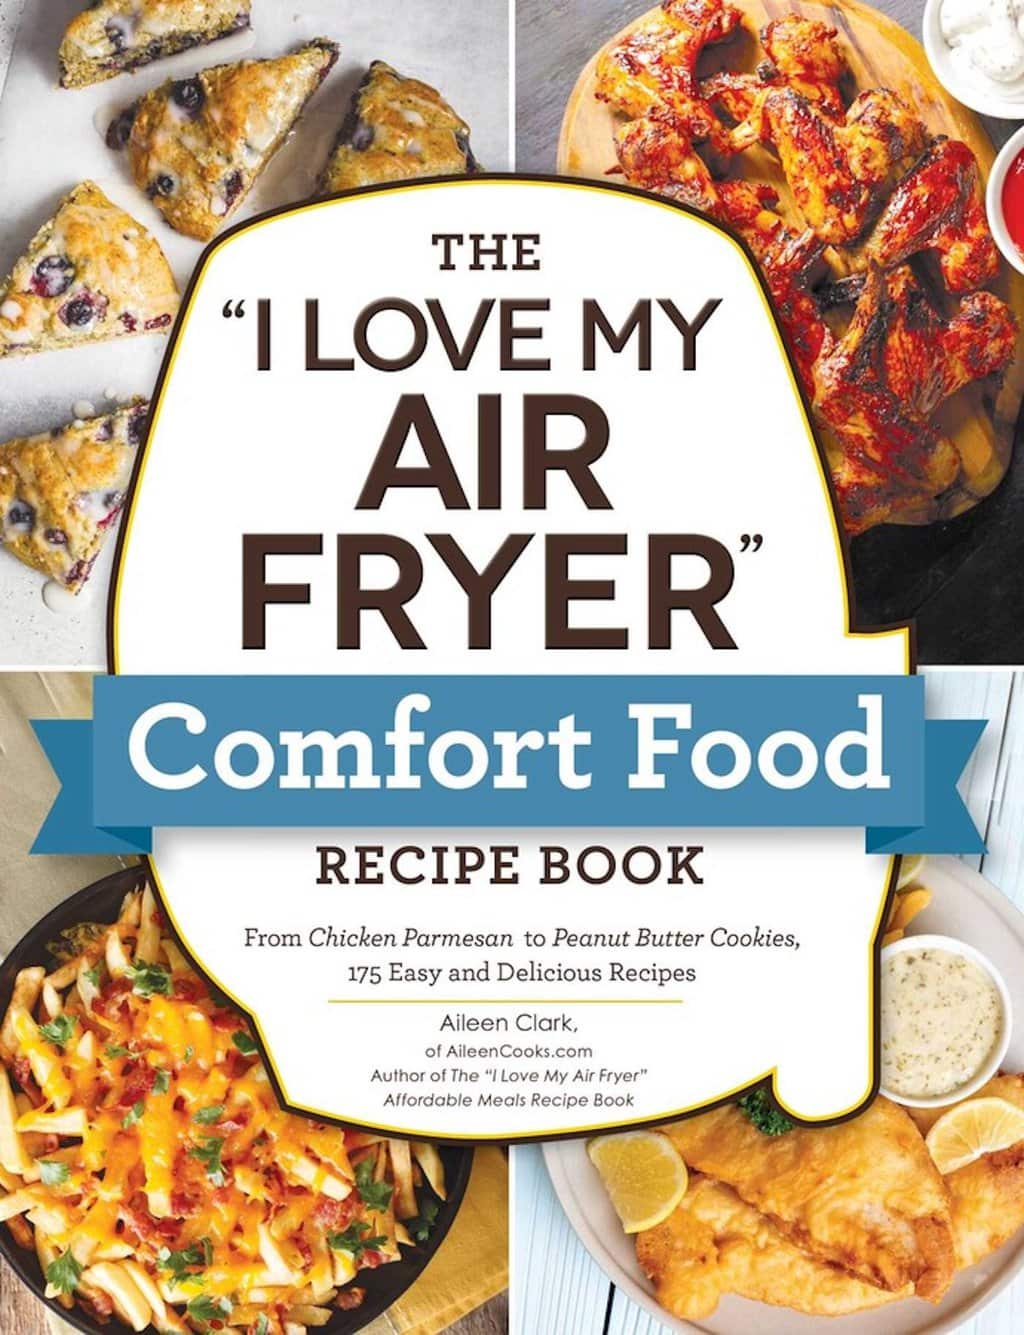 The cover image for The "I Love My Air Fryer" Comfort Food Recipes Book.